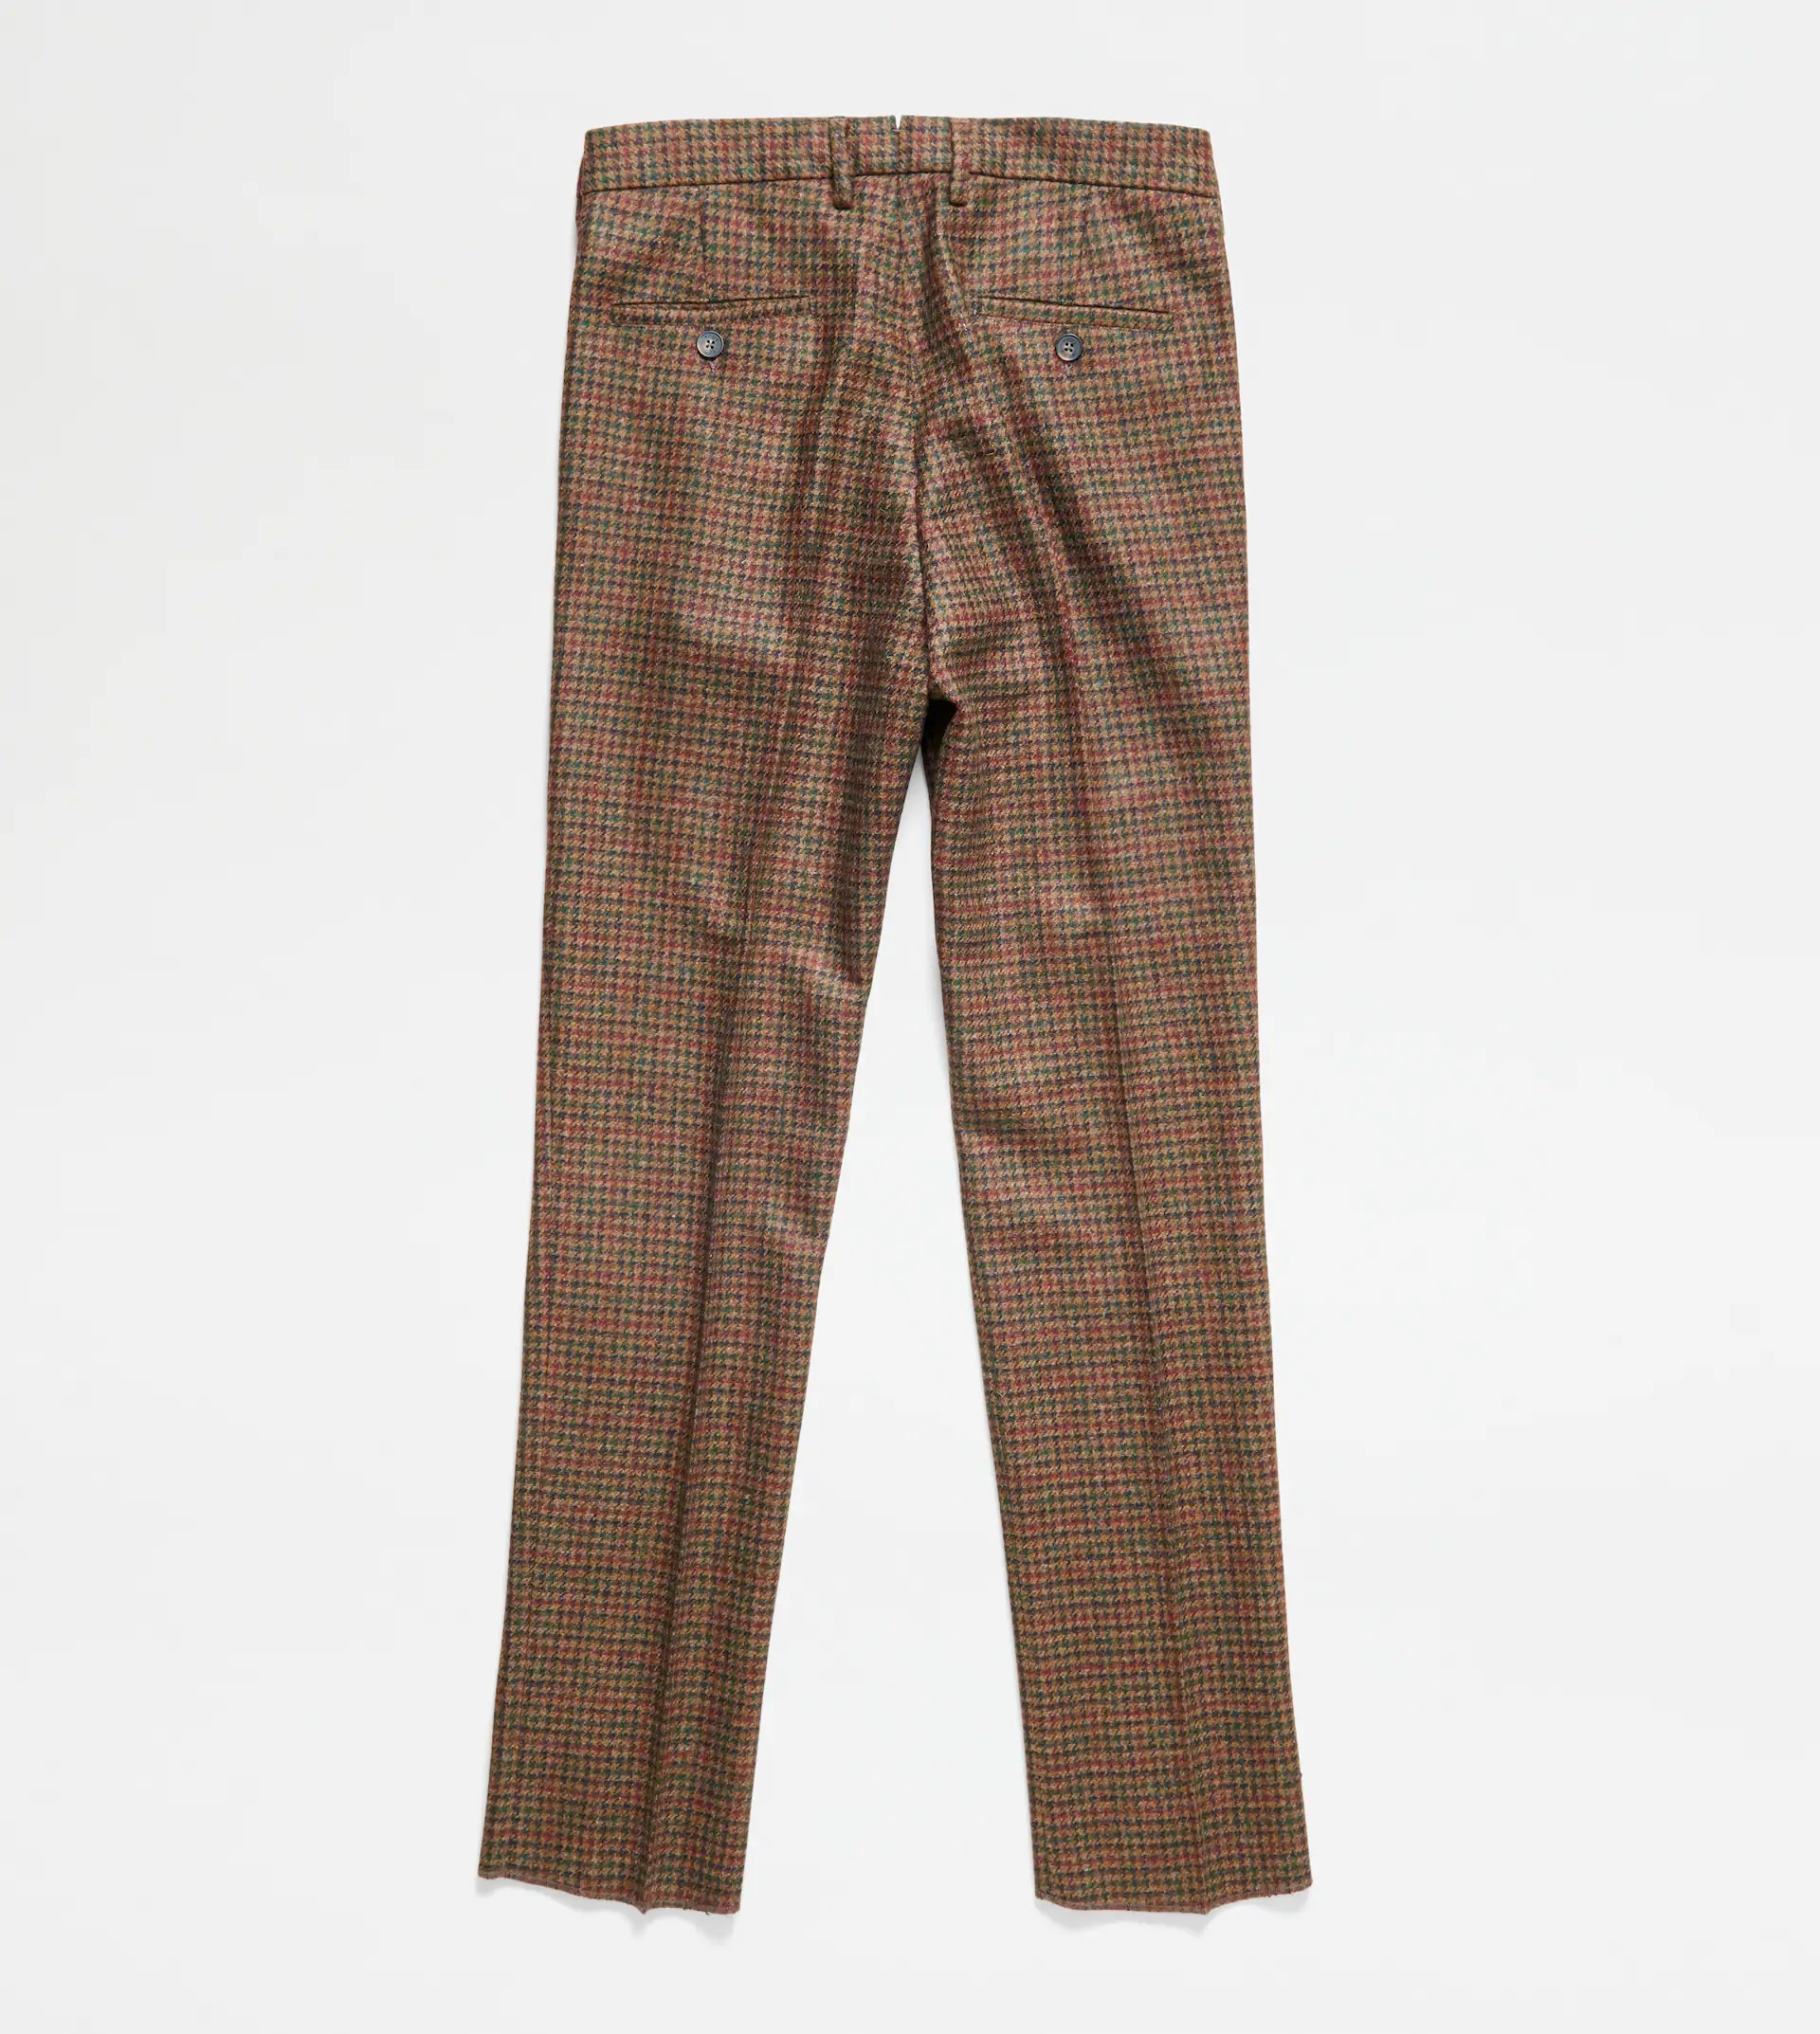 CLASSIC SHETLAND TROUSERS - BROWN, RED - 8